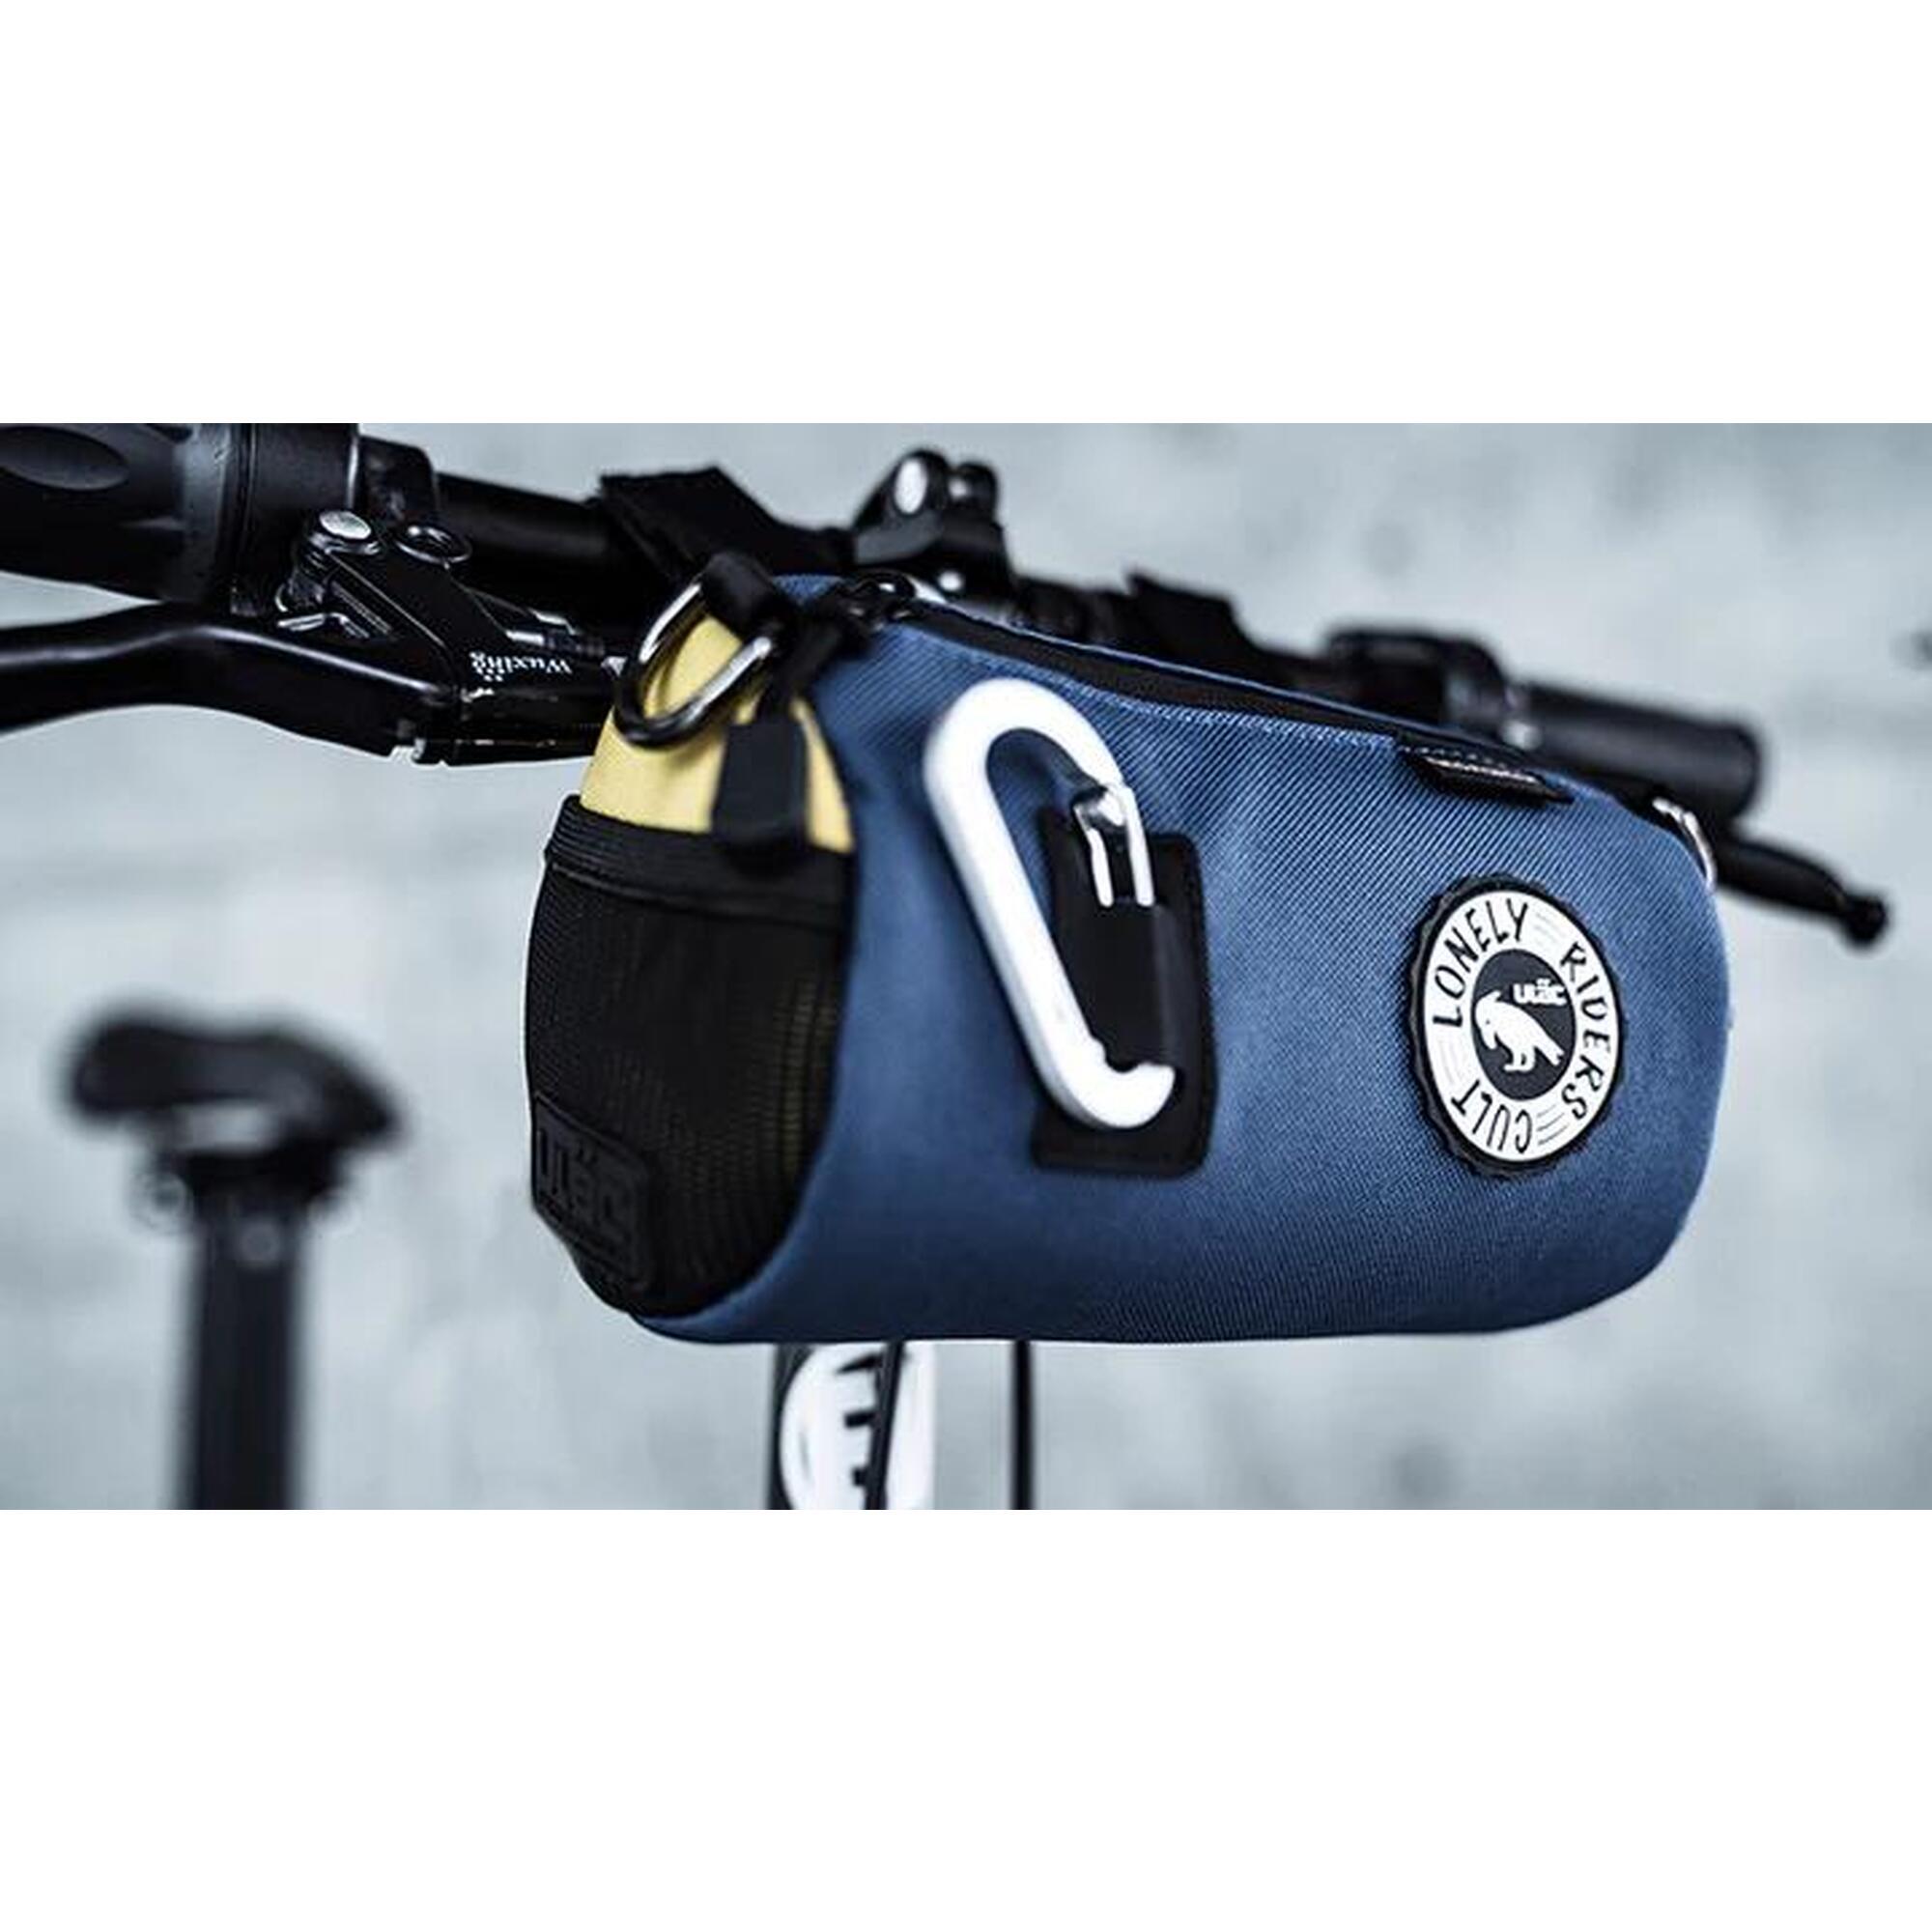 COURSIER SPRINT CYCLING BAG 1.5L - NAVY/YELLOW